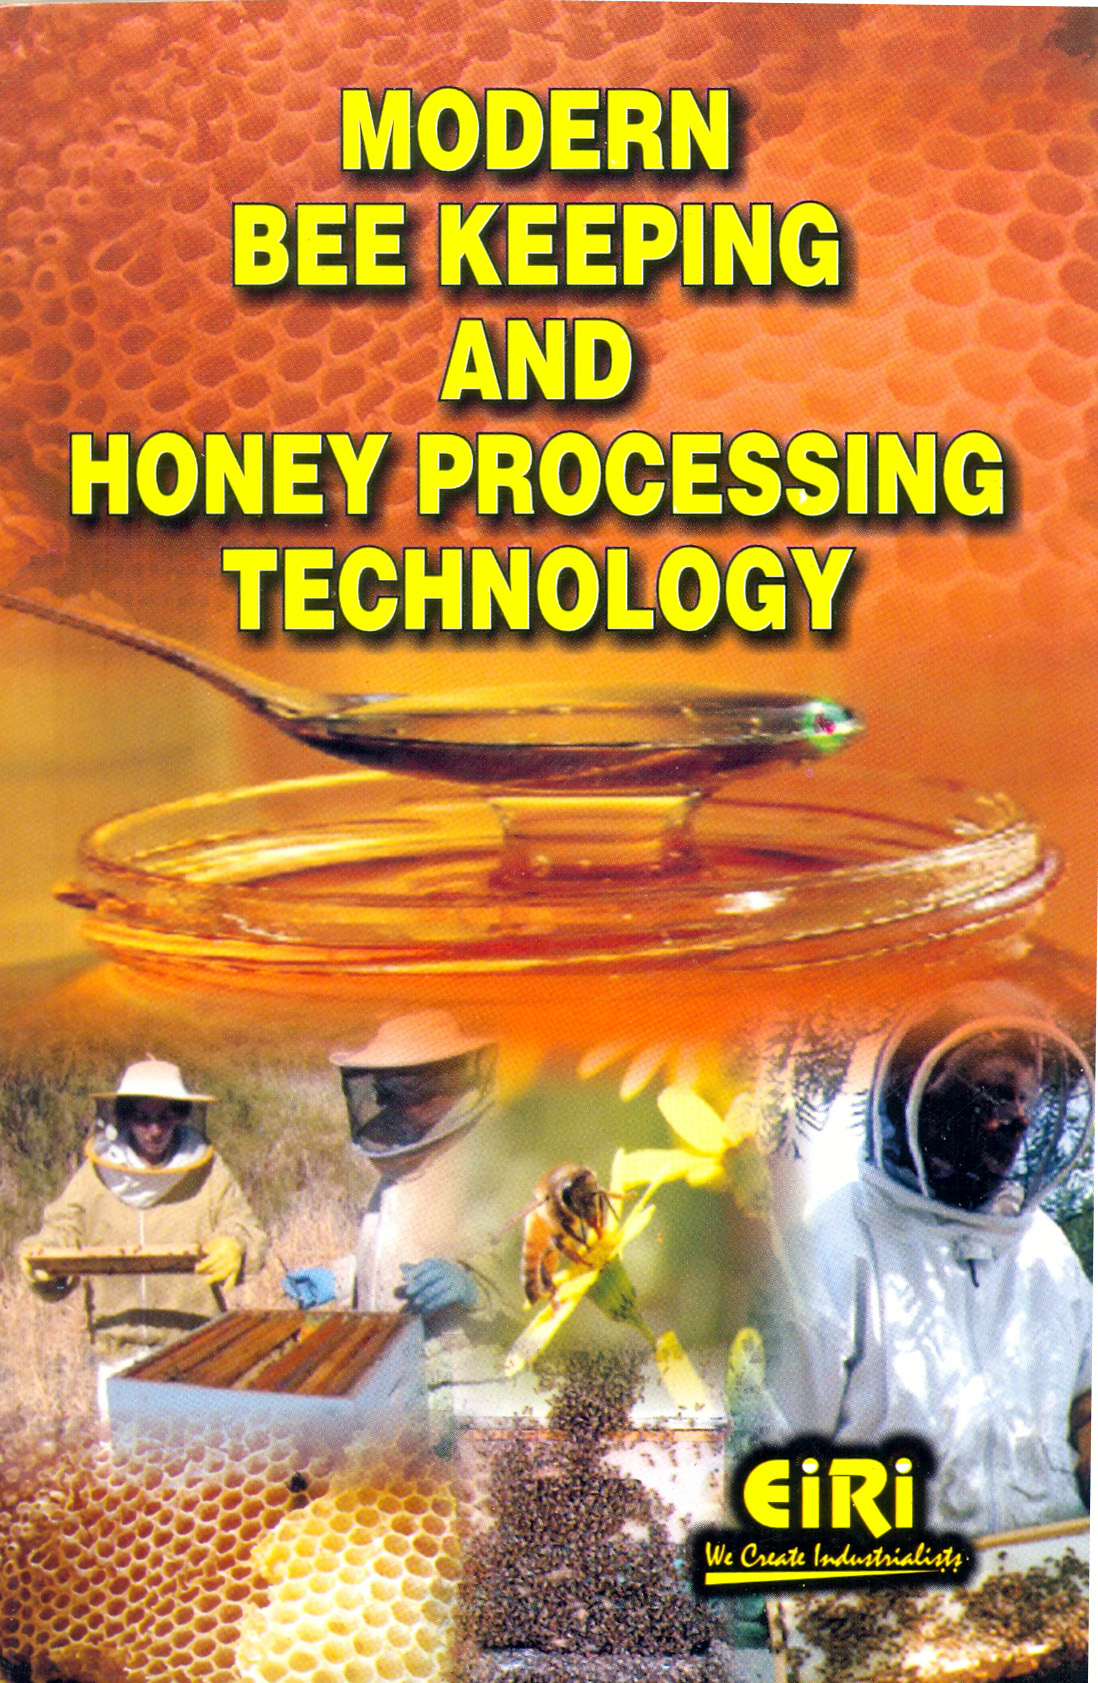 modern bee keeping and honey processing technology (hand book)